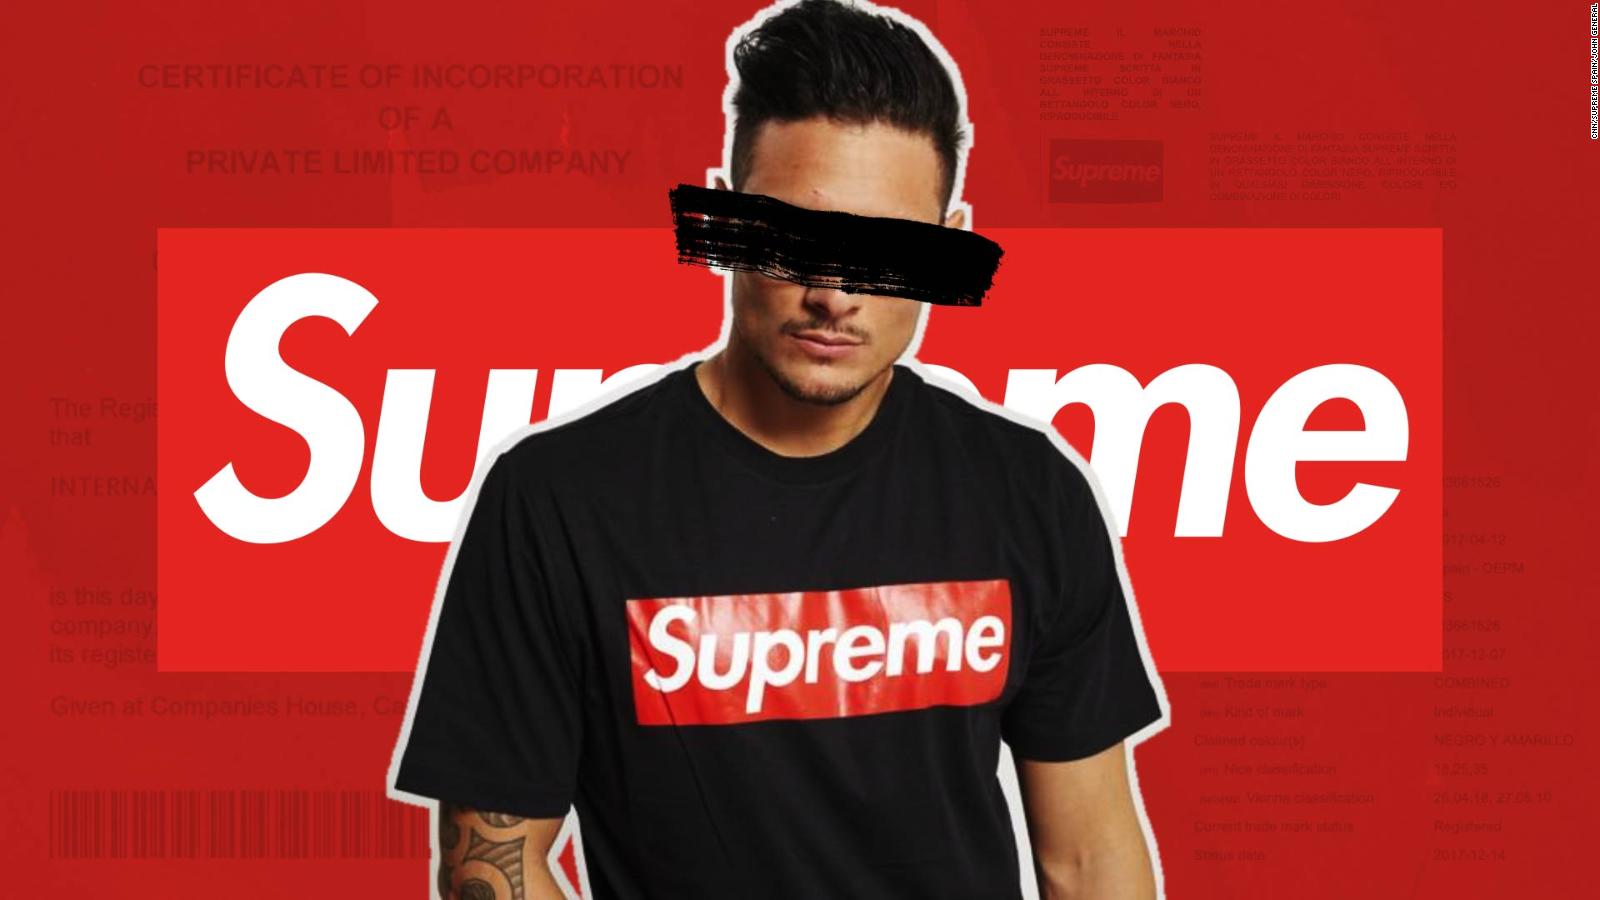 Supreme is under siege by imitators. Here's why it's legal - CNN Video